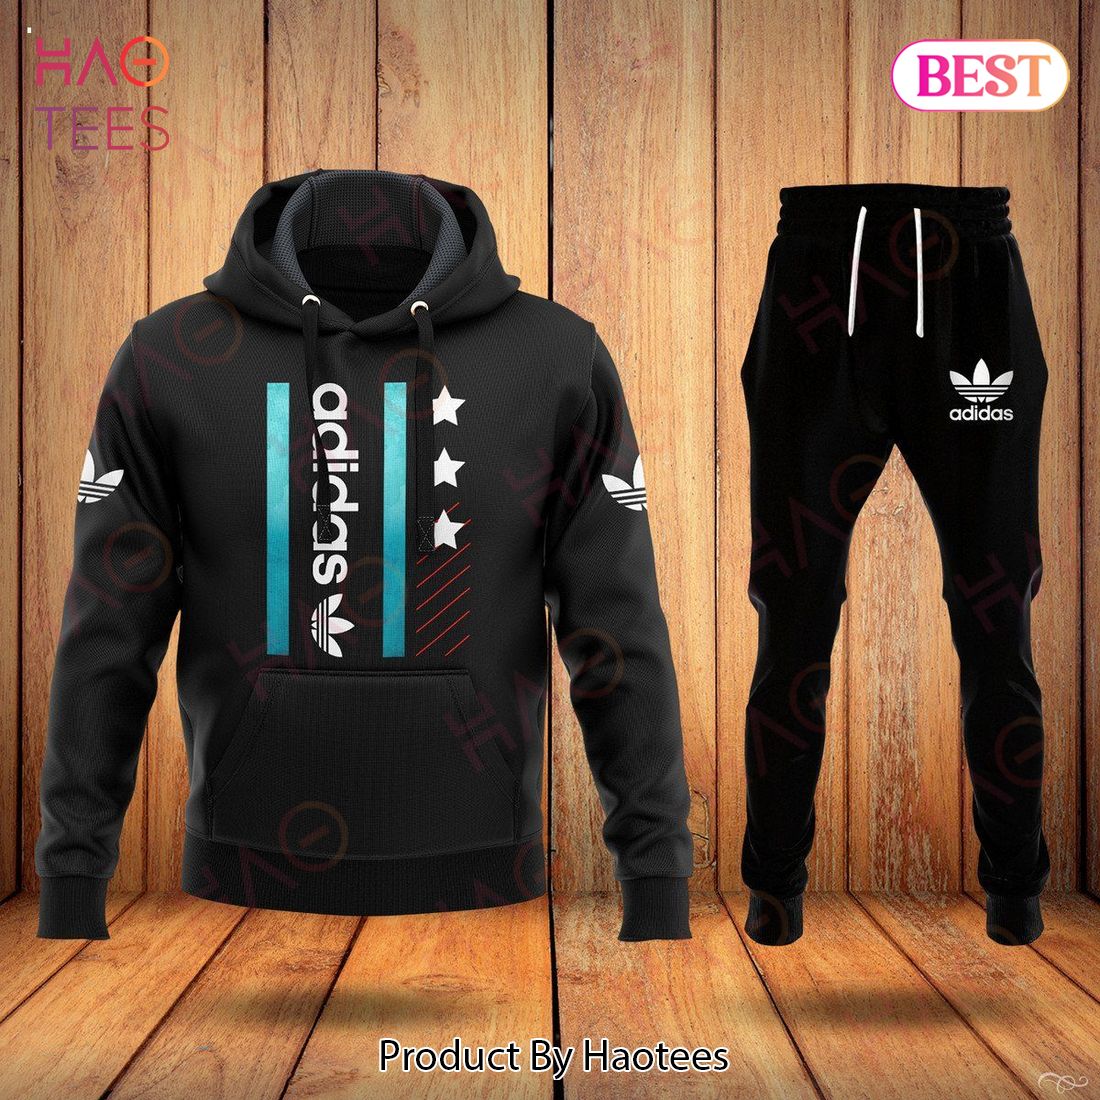 Adidas Full Black Luxury Brand Hoodie And Pants Limited Edition